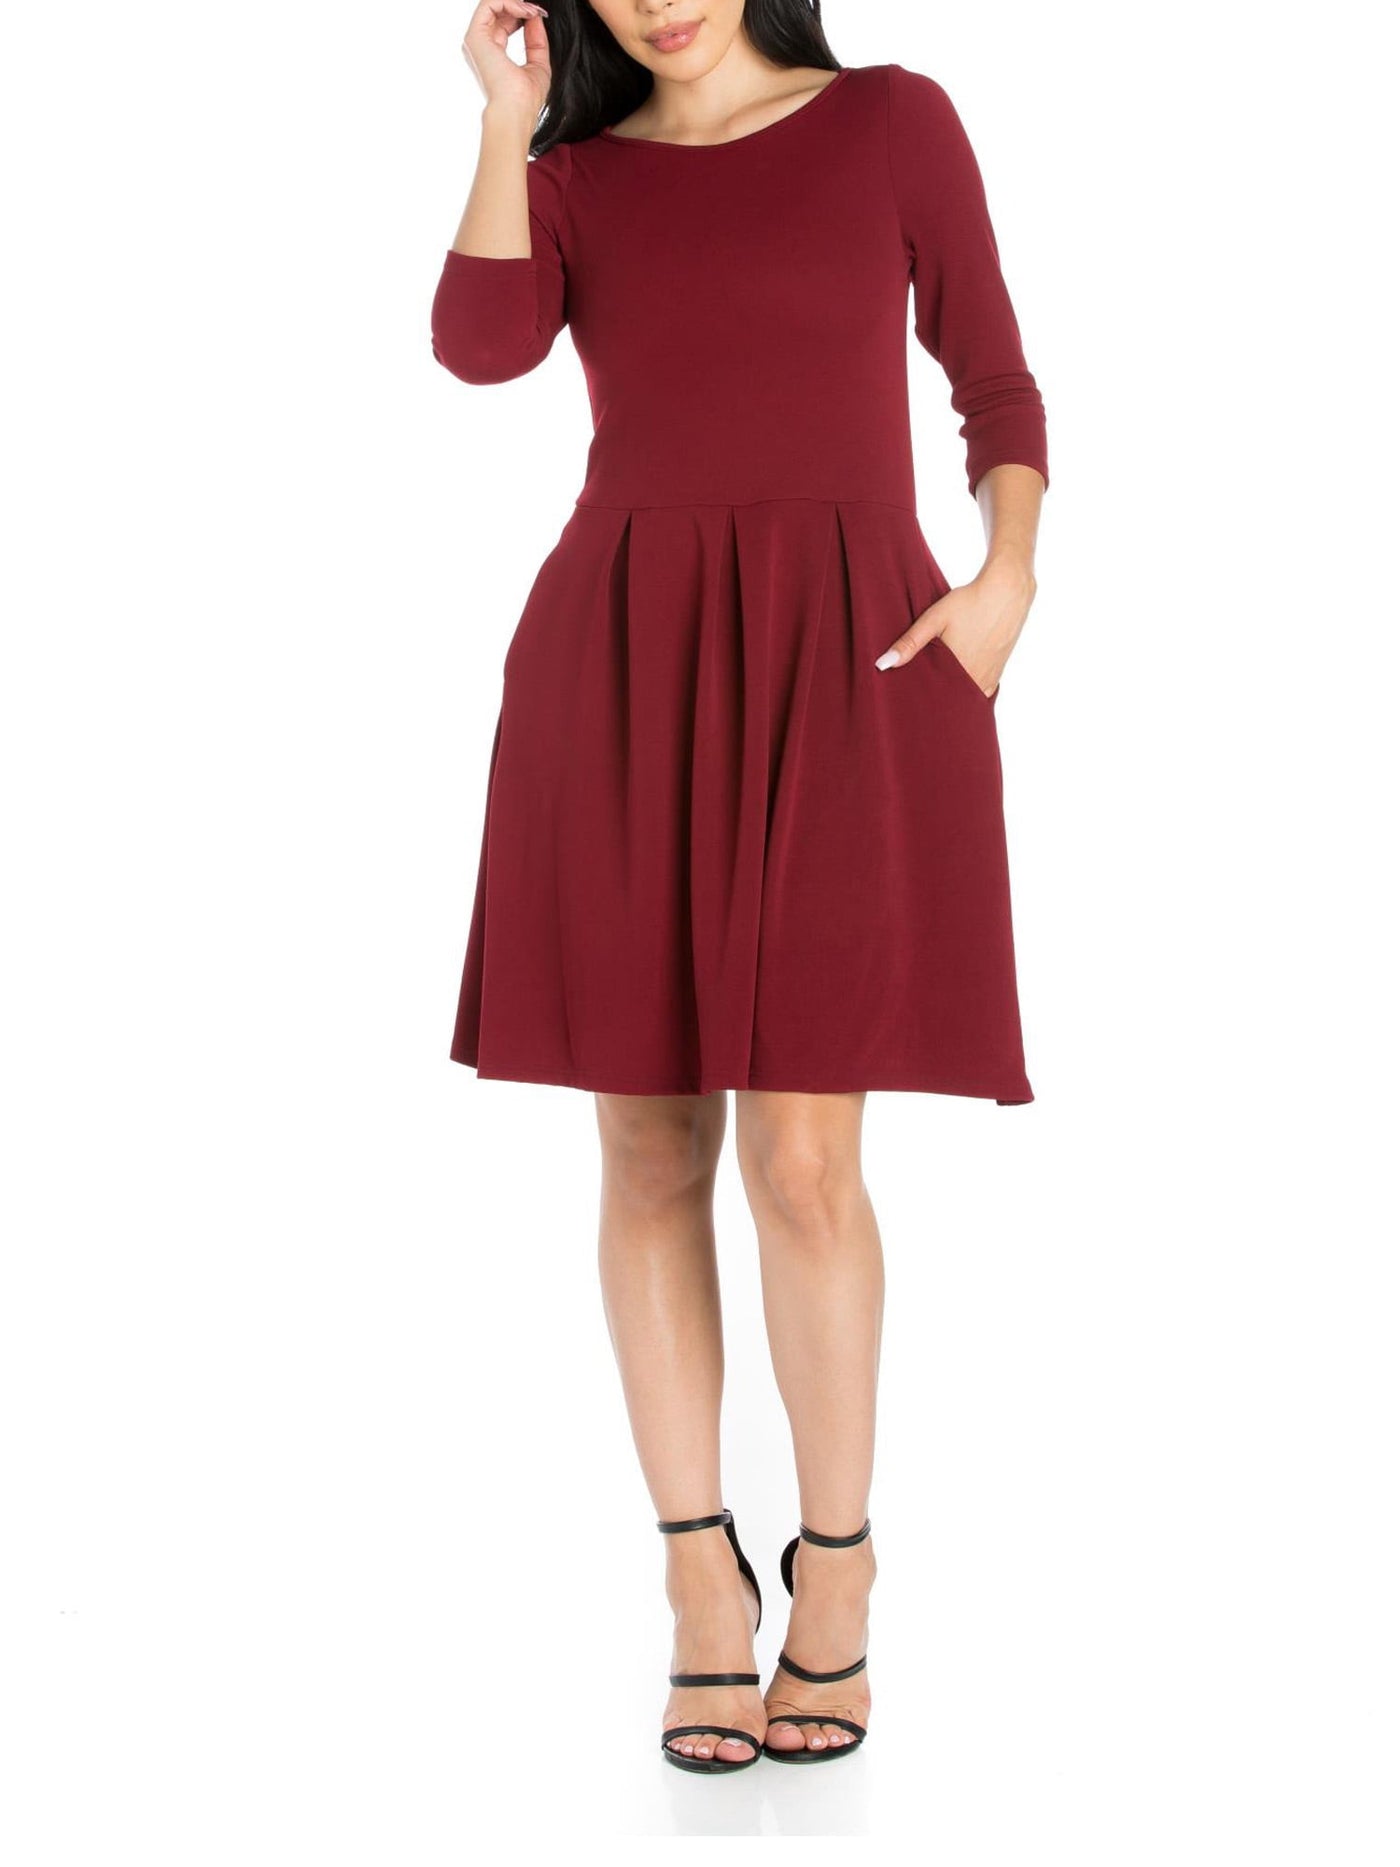 24 SEVEN COMFORT Womens Burgundy Pocketed Unlined Pullover Pleated 3/4 Sleeve Boat Neck Above The Knee Fit + Flare Dress L